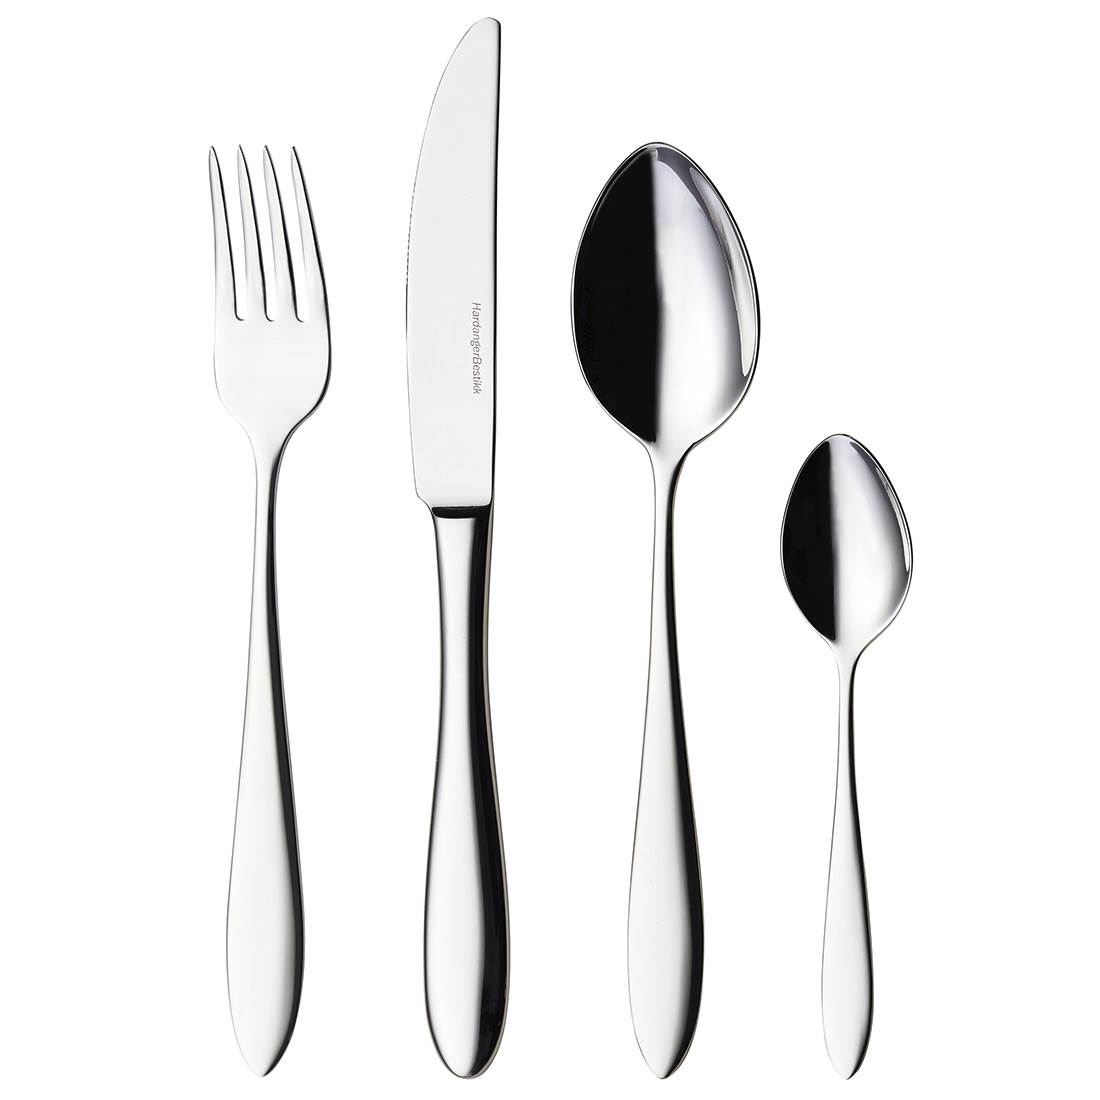 Fjord cutlery set product image